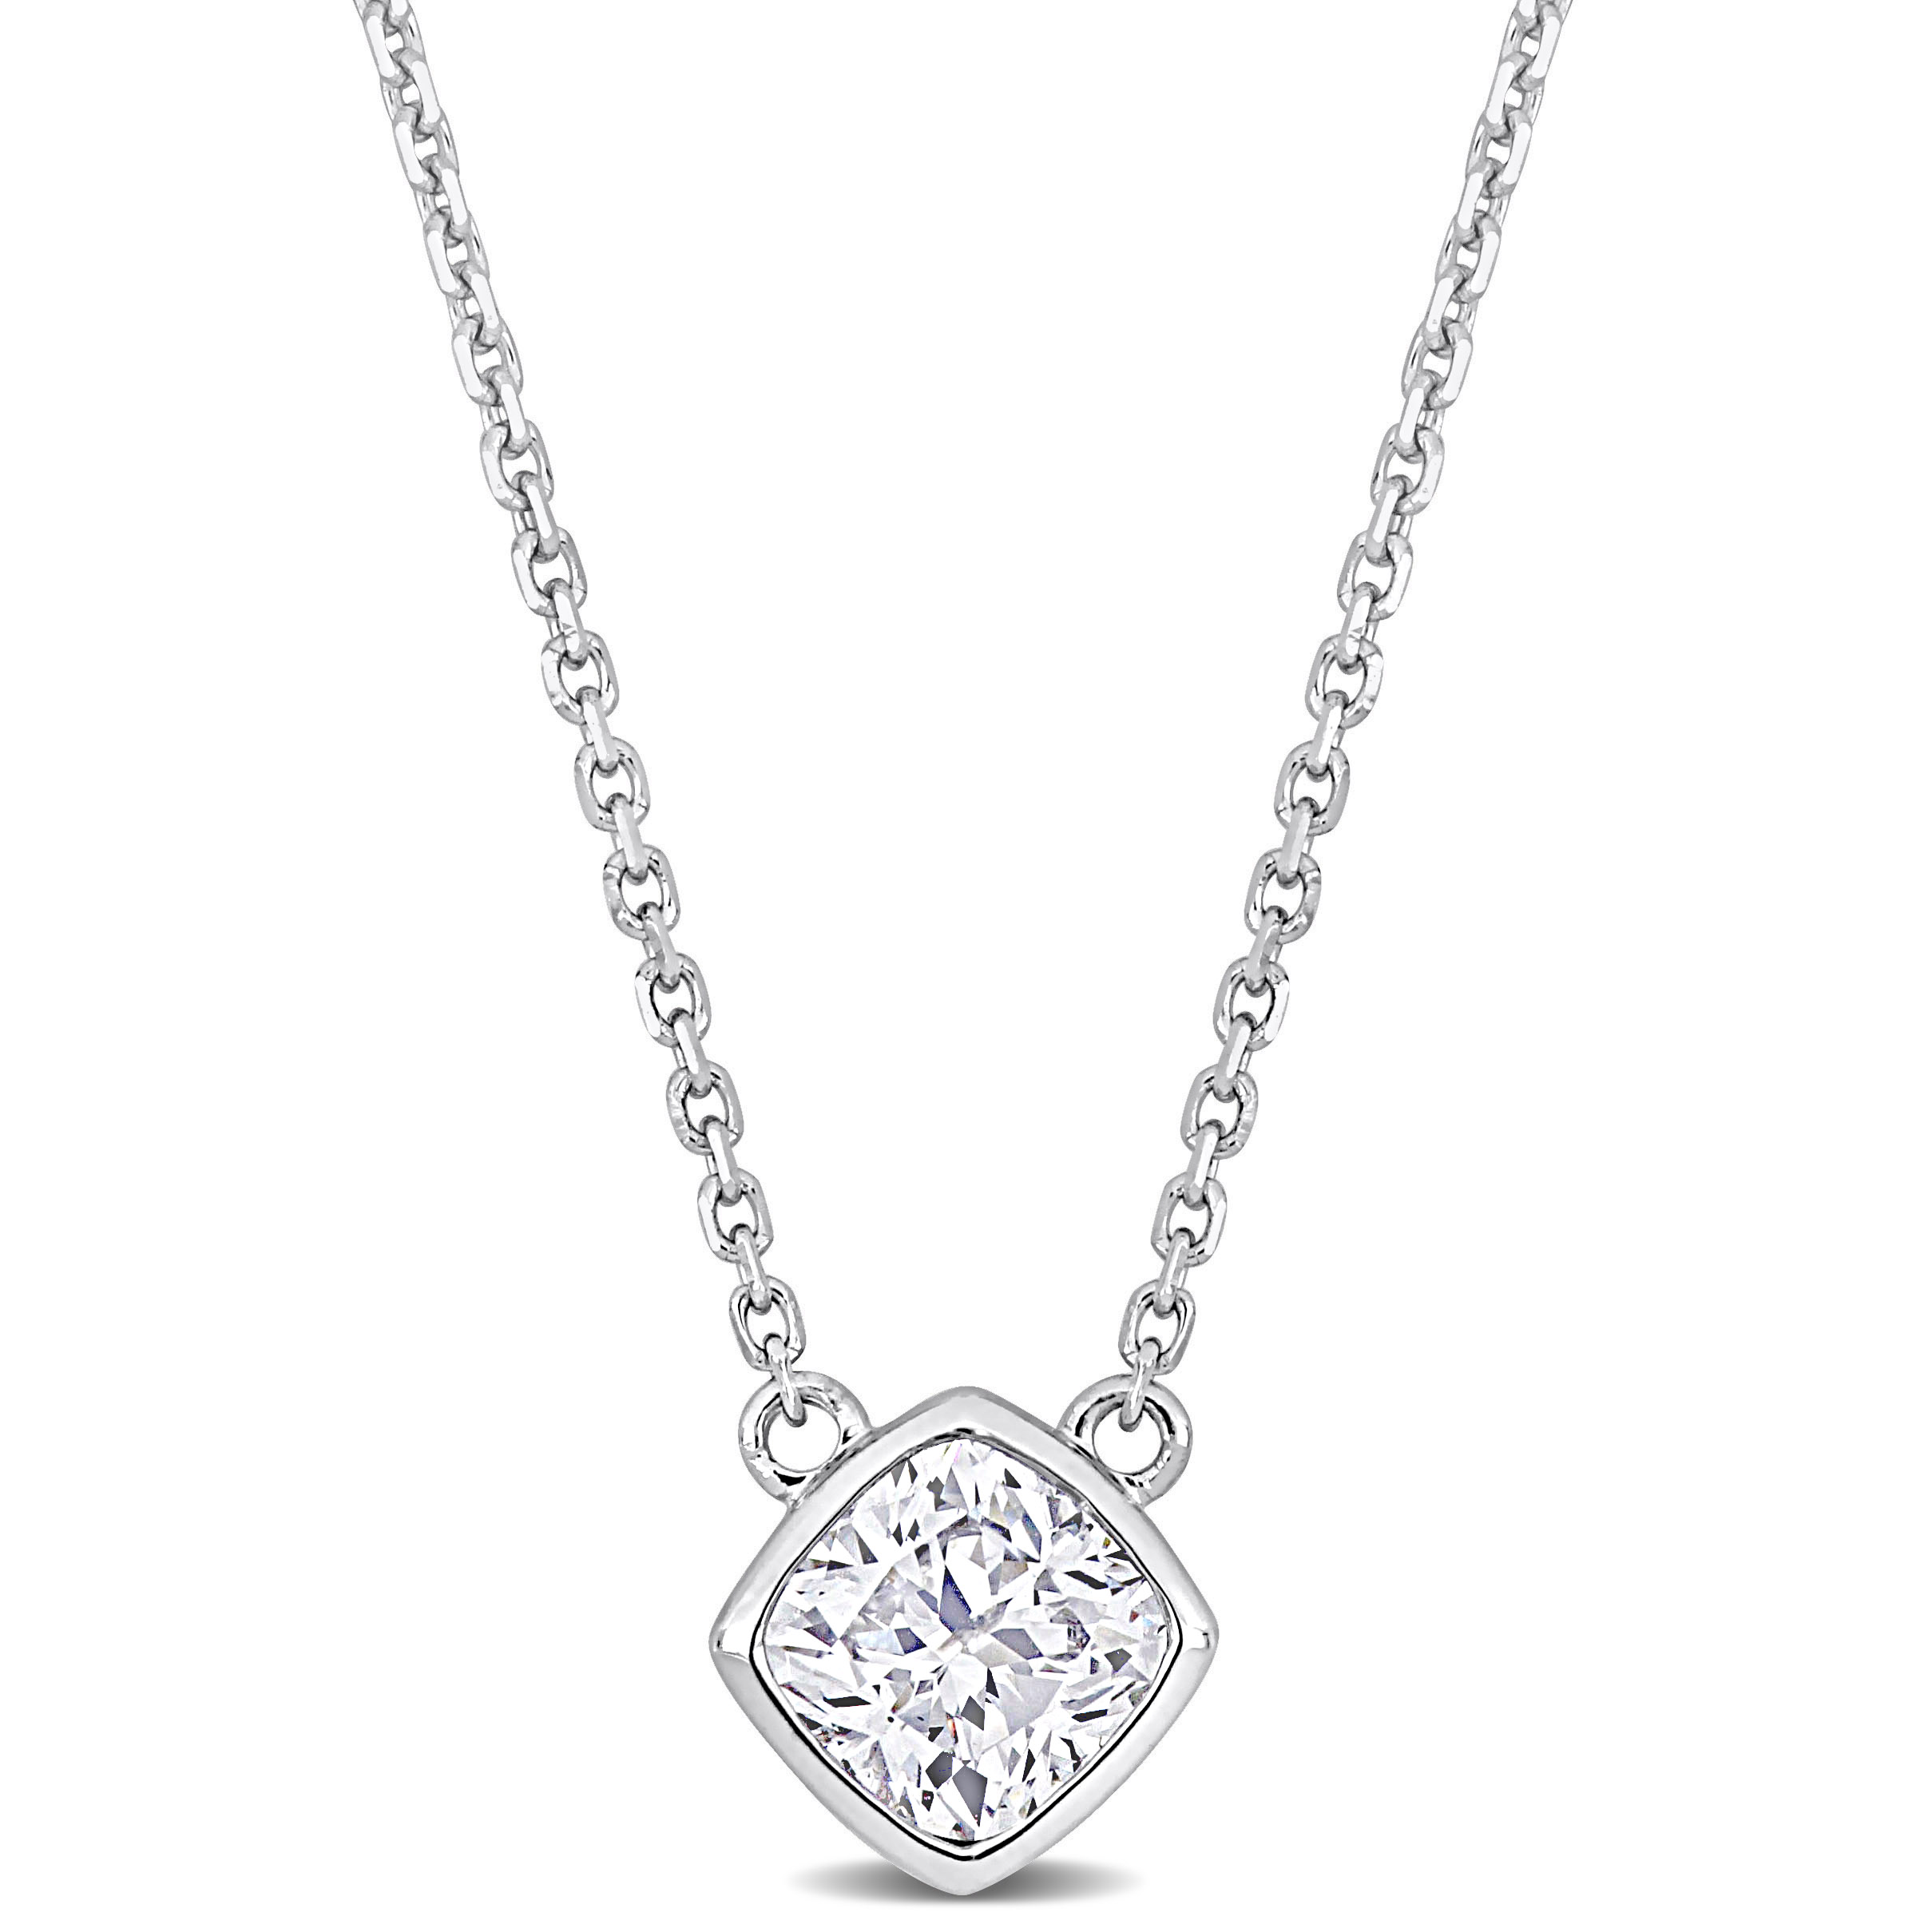 5/8 CT TDW Cushion-Cut Diamond Solitaire Drop Necklace in 14k White Gold - 17 in.